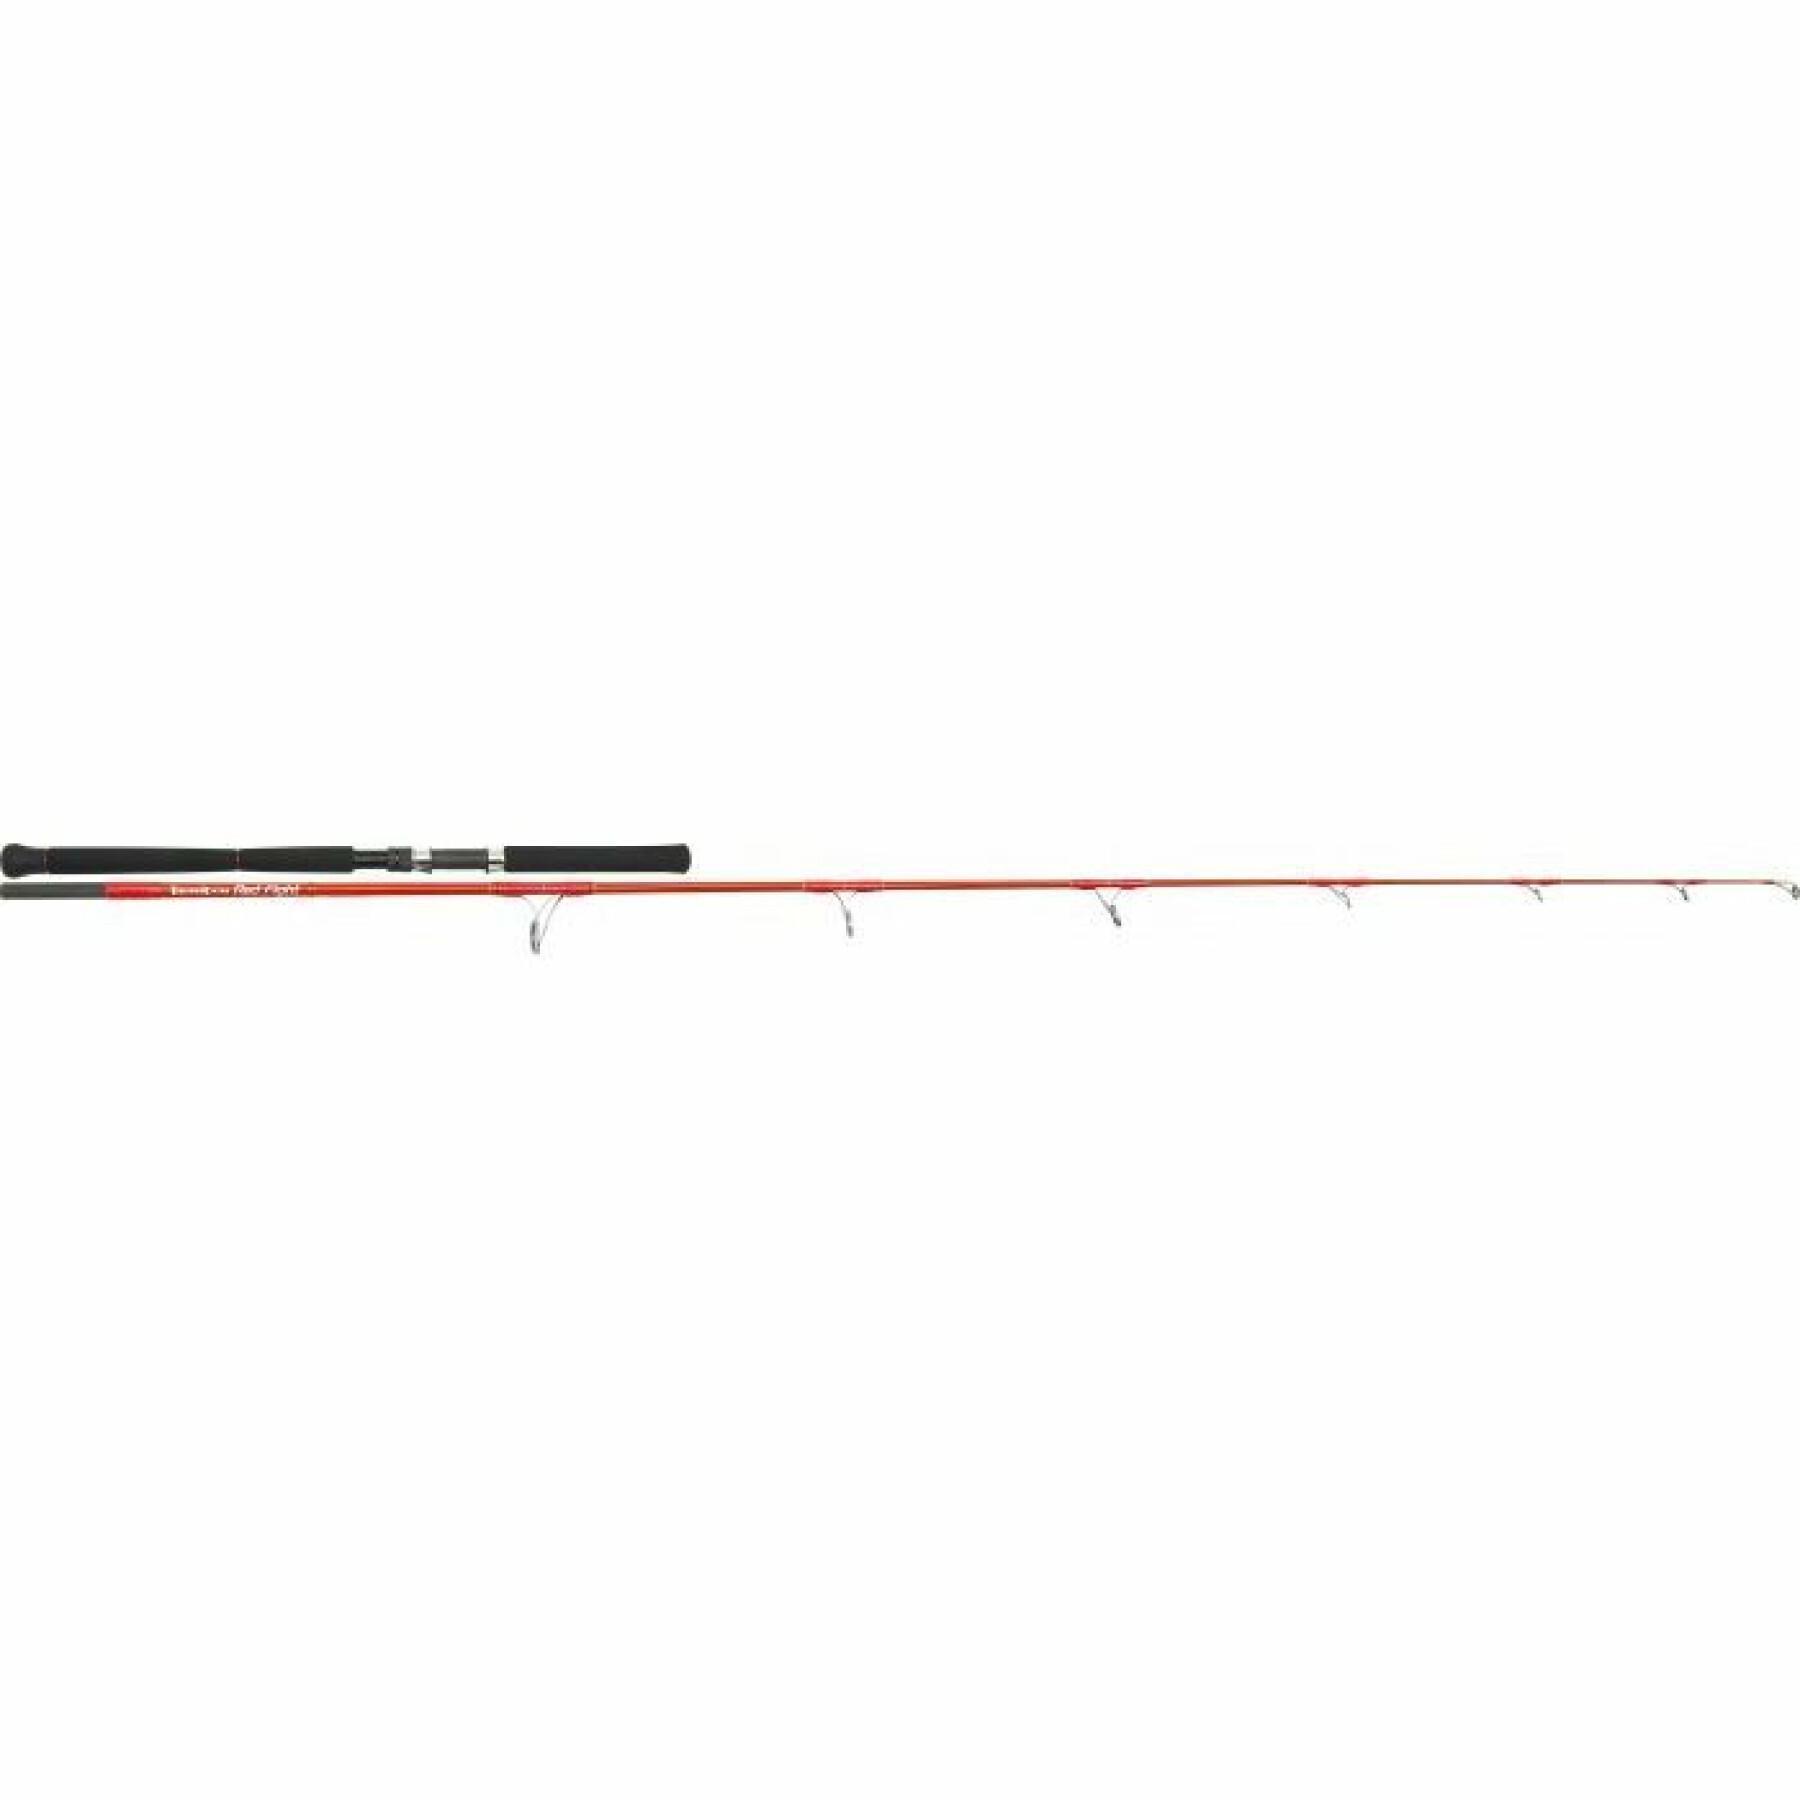 Spinstang Tenryu Red Fight 60-180g